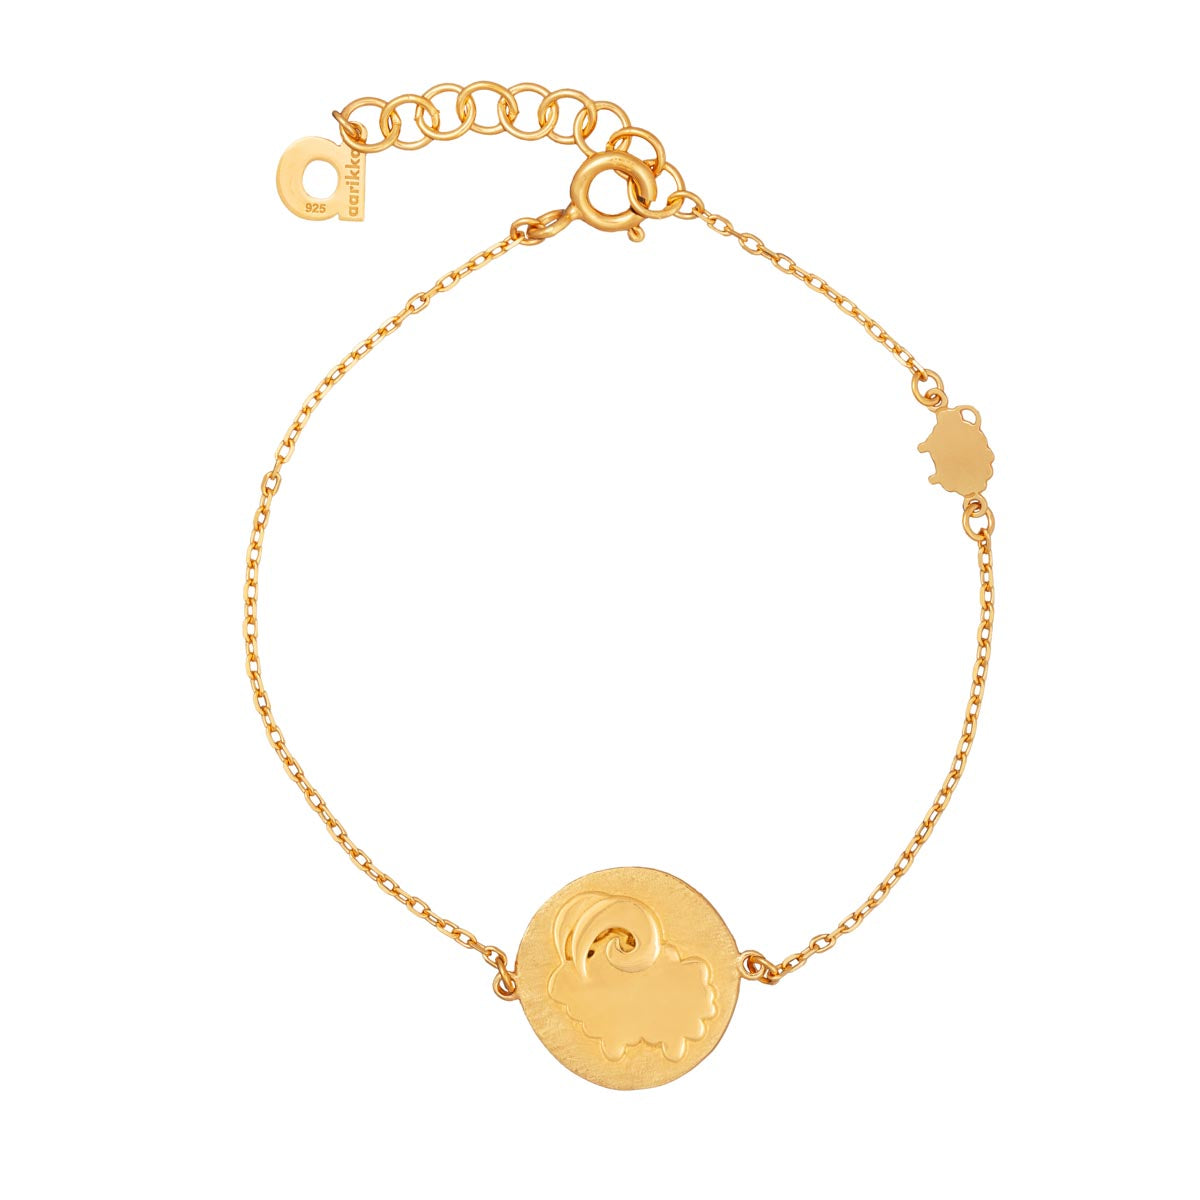 Aries bracelet, gold-plated silver